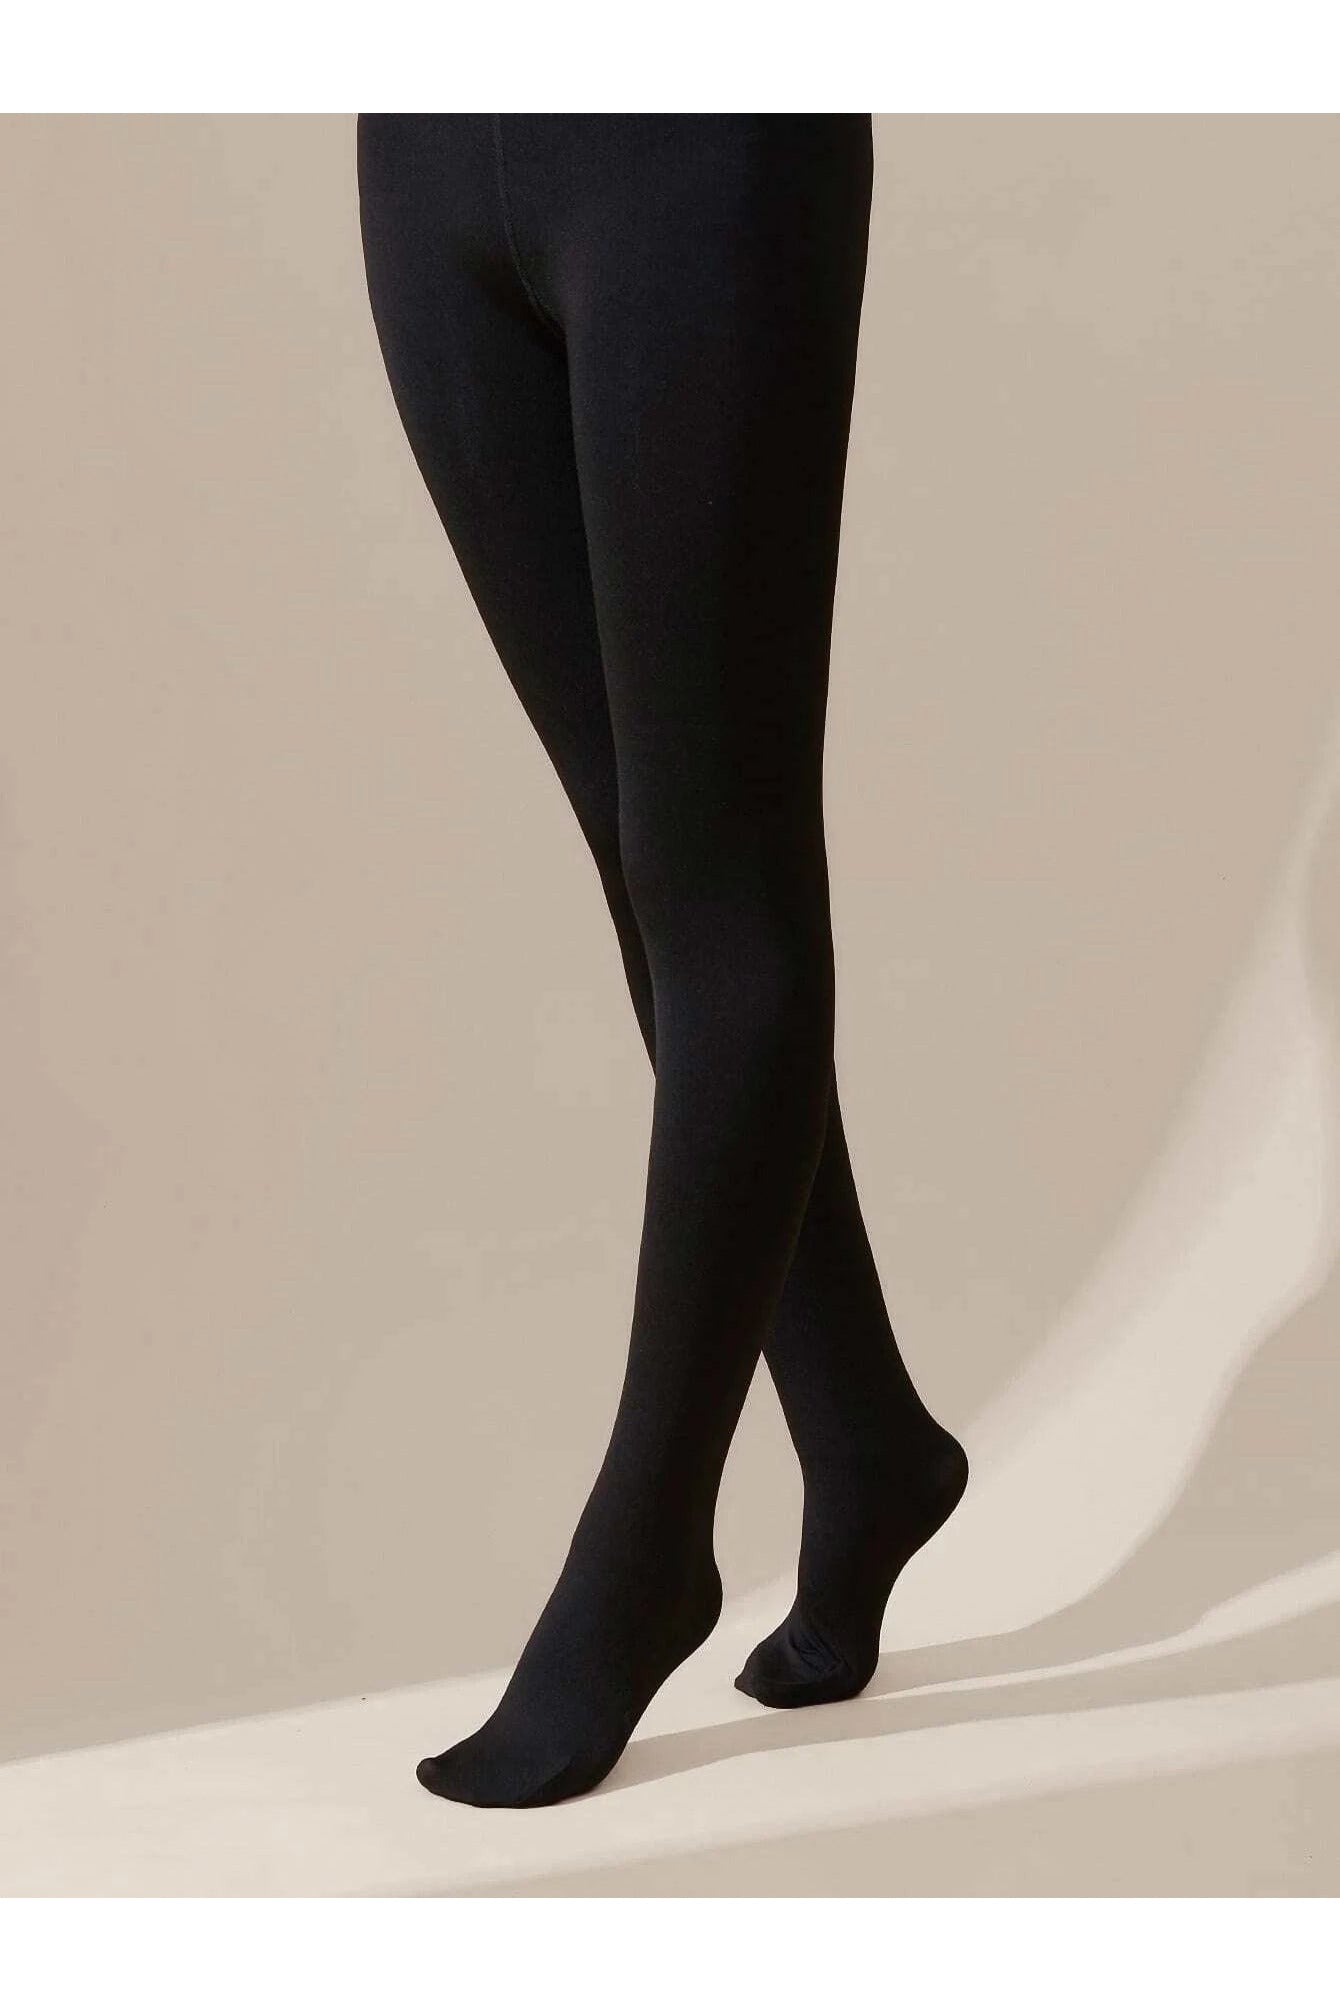 Shein 1pair Solid Tights - One Size Black